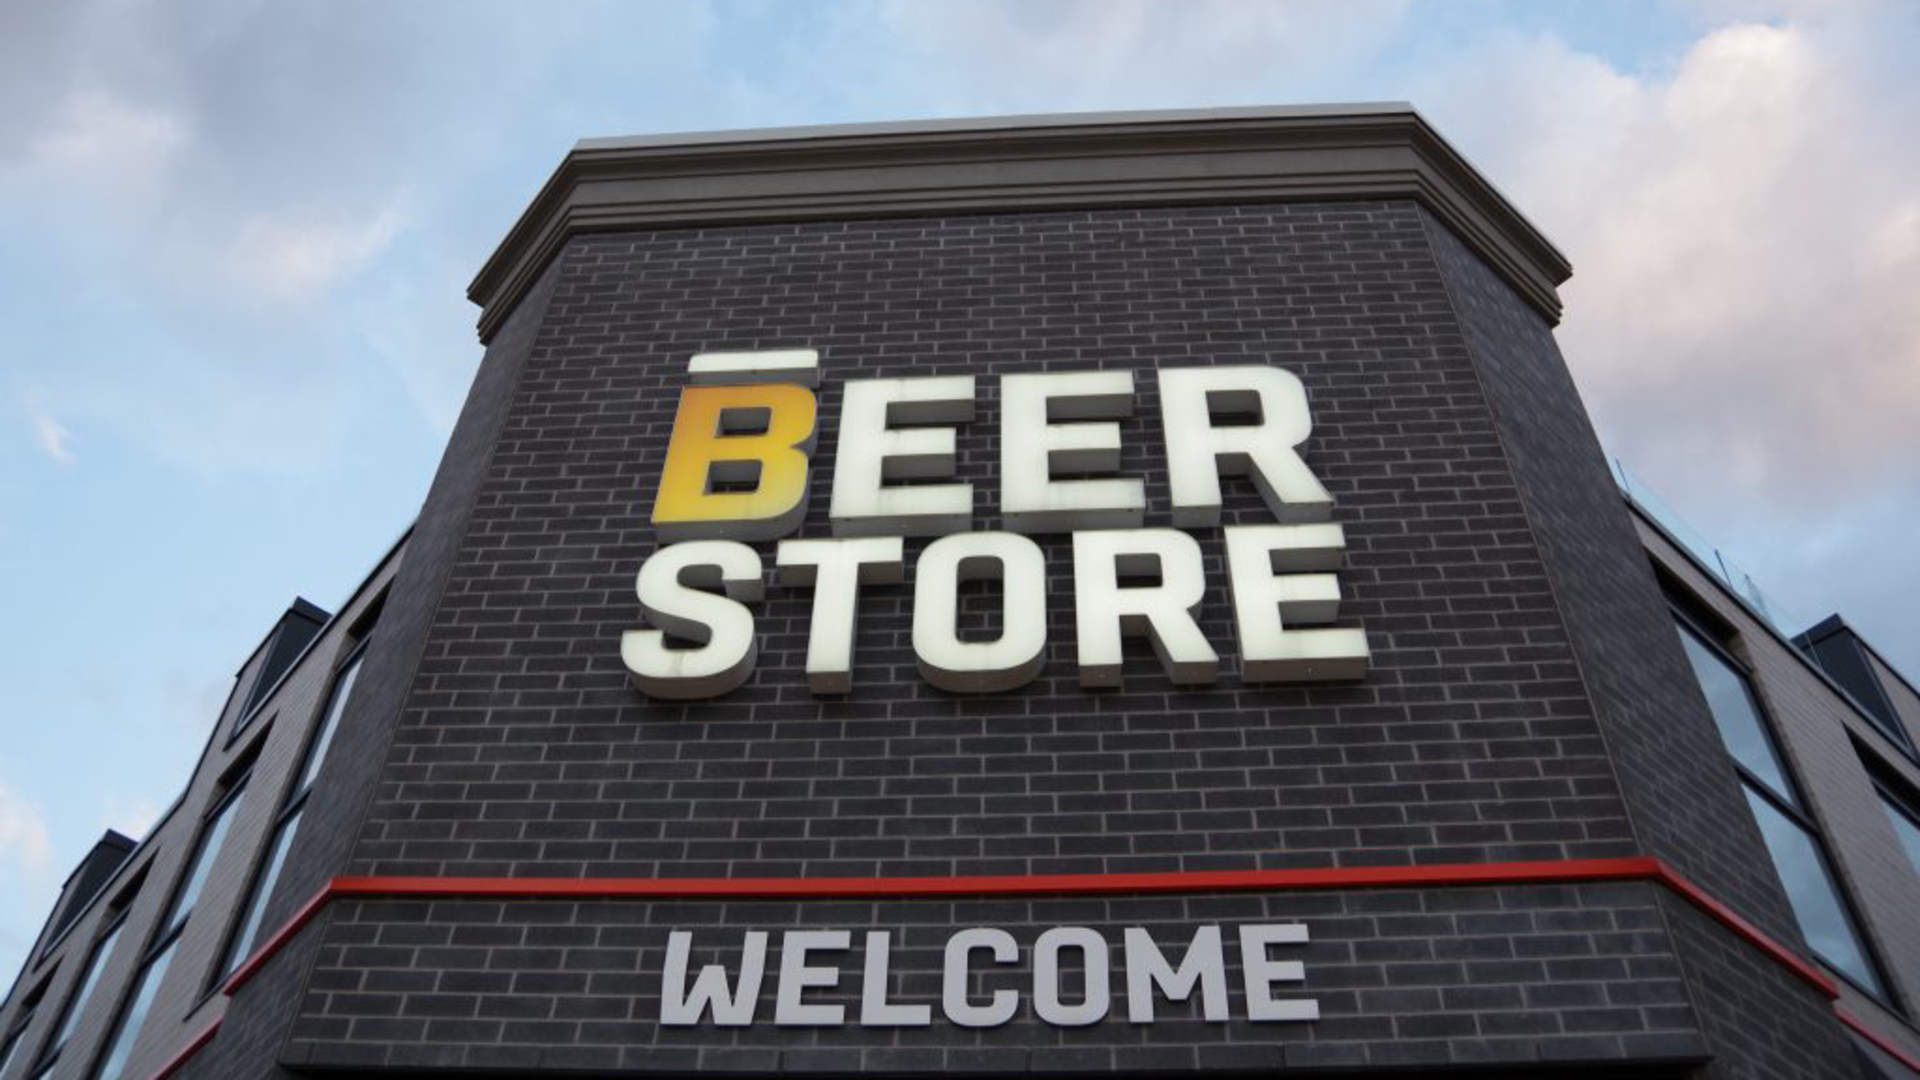 Beer Store will be able to sell lotto tickets and other items